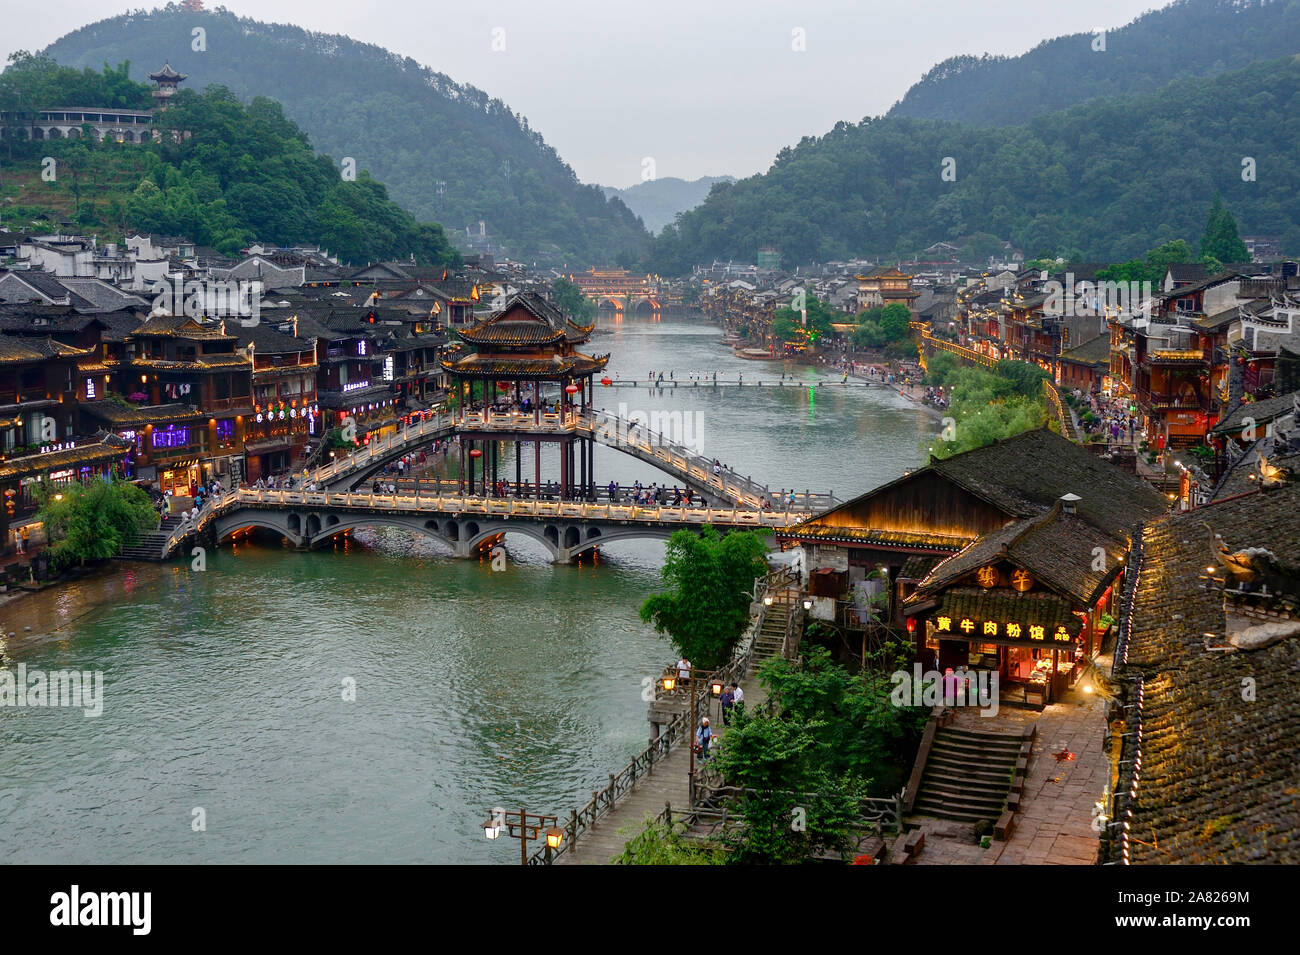 Traditional Chinese architecture flanks the tower footbridge over the Tuo Jiang River in Fenghuang Ancient City in Tibet. Stock Photo